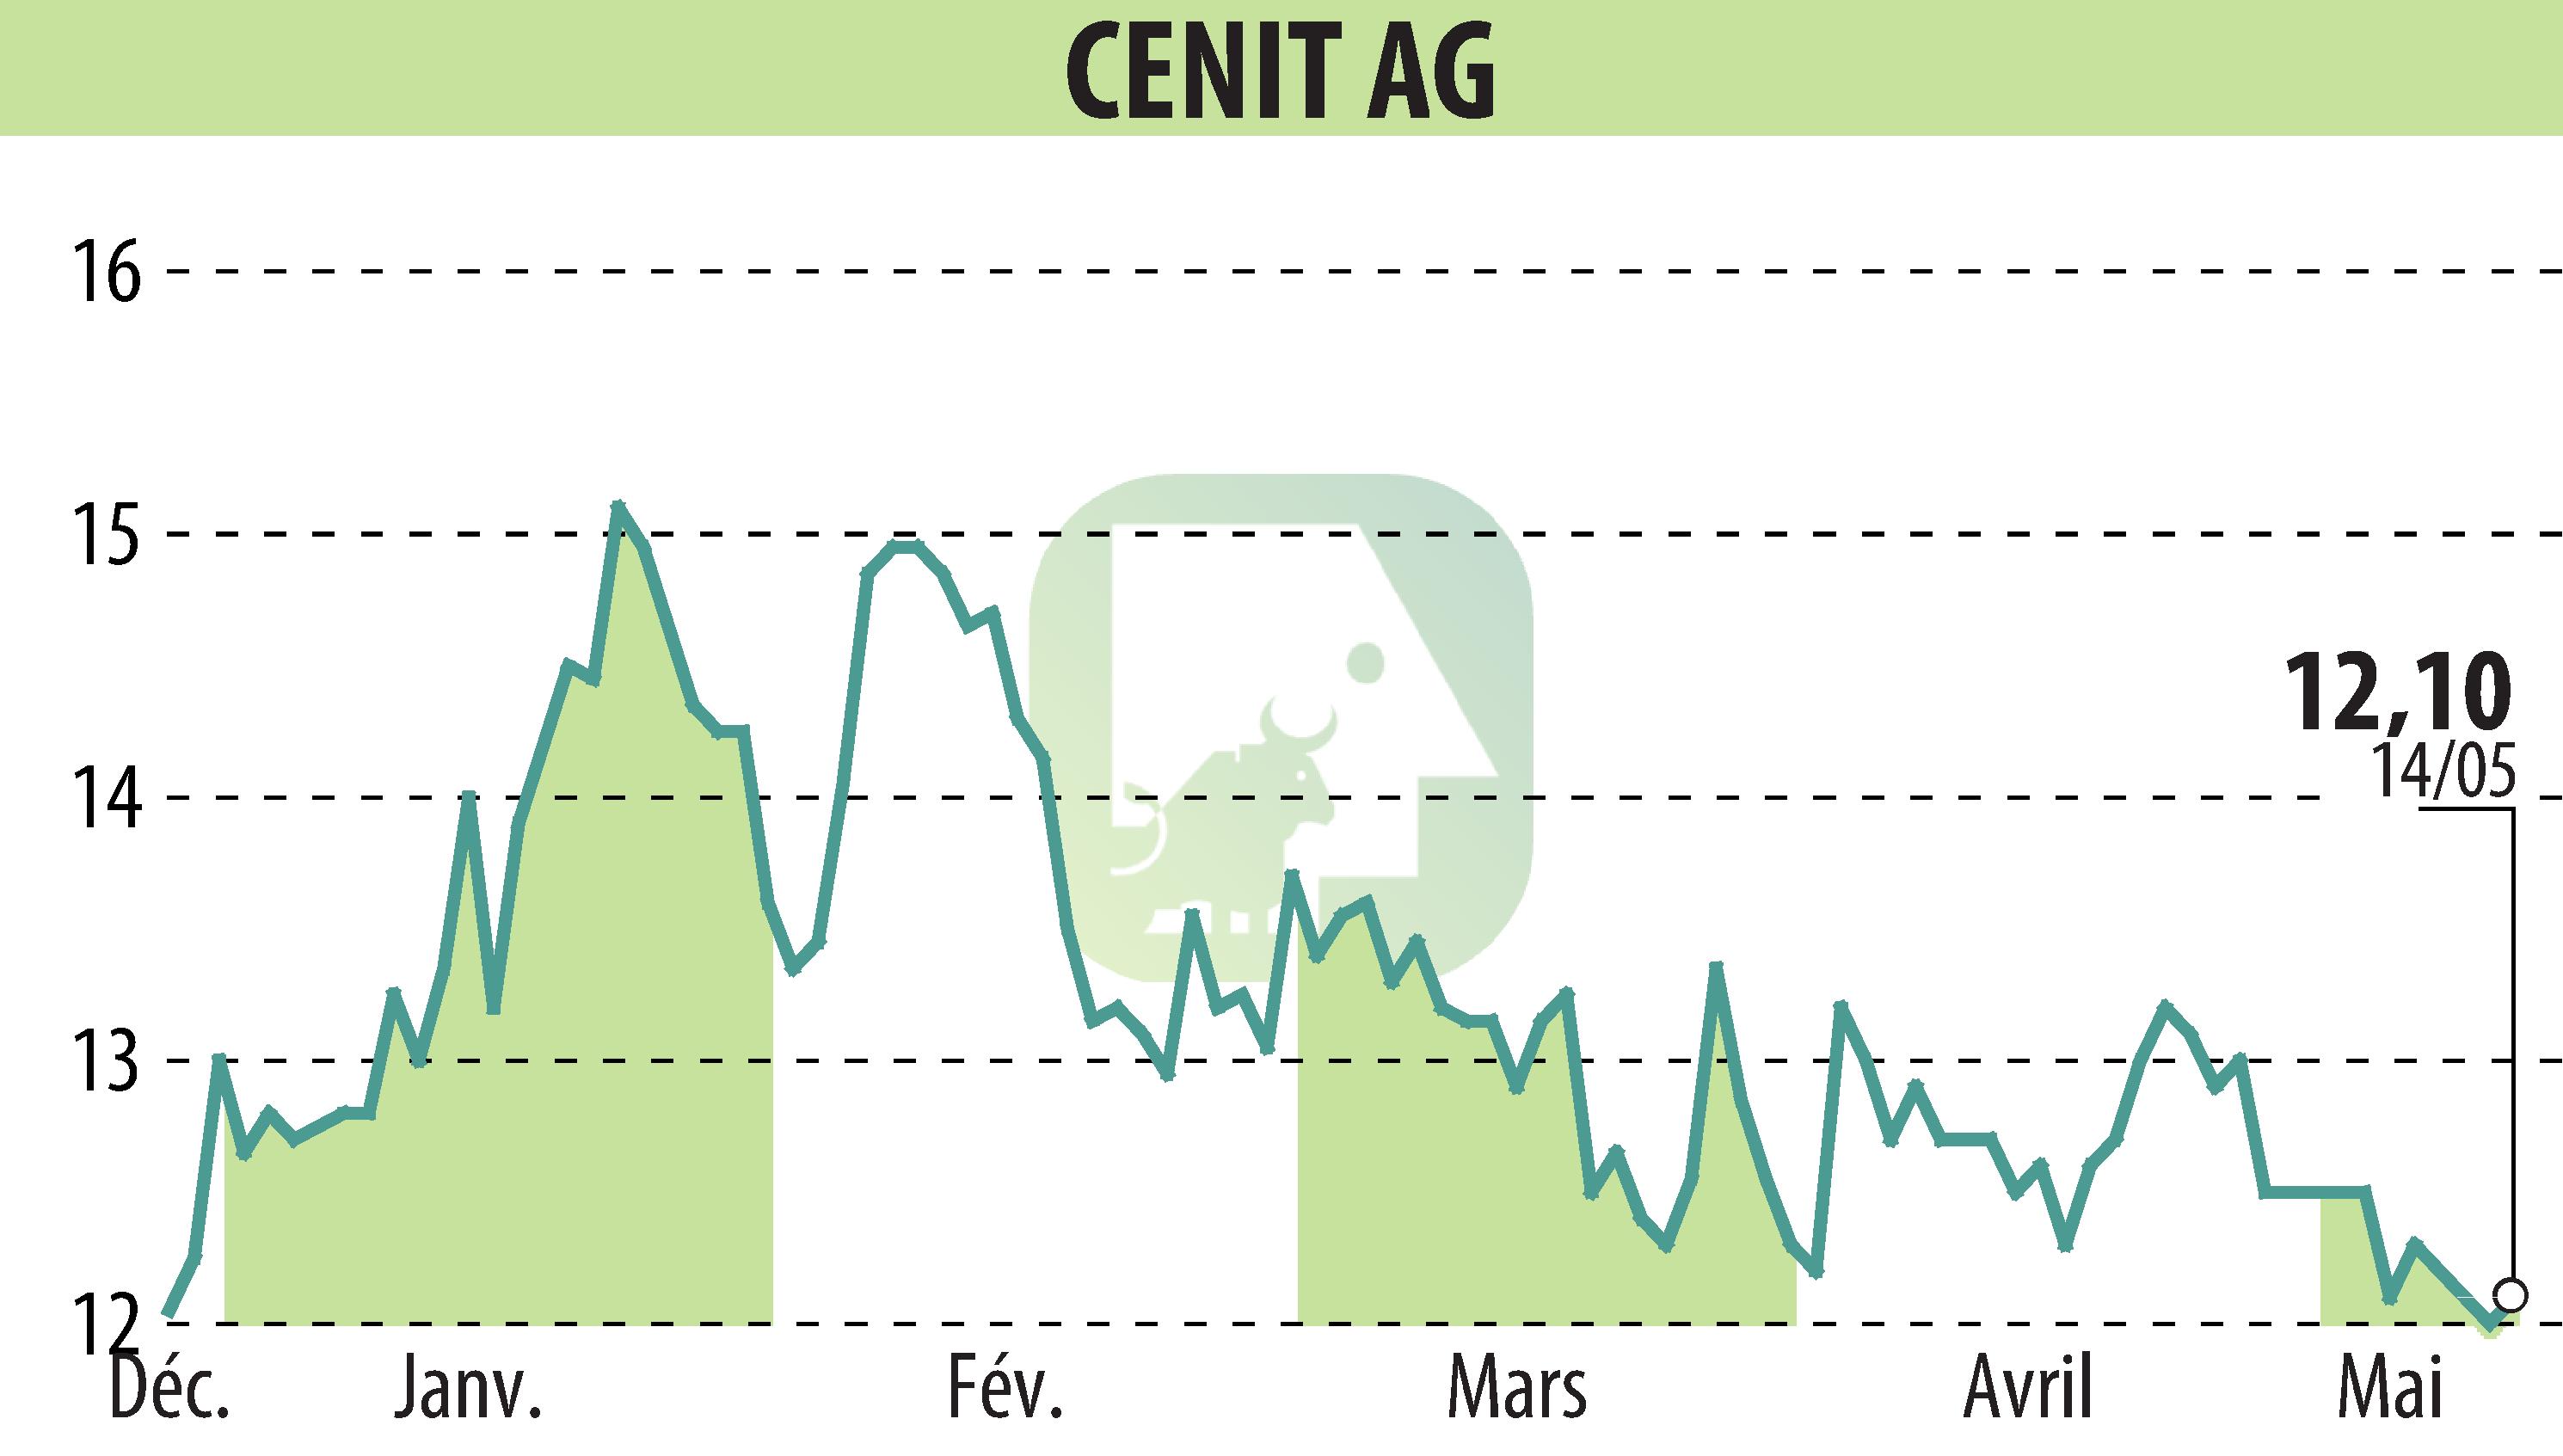 Stock price chart of CENIT AG (EBR:CSH) showing fluctuations.